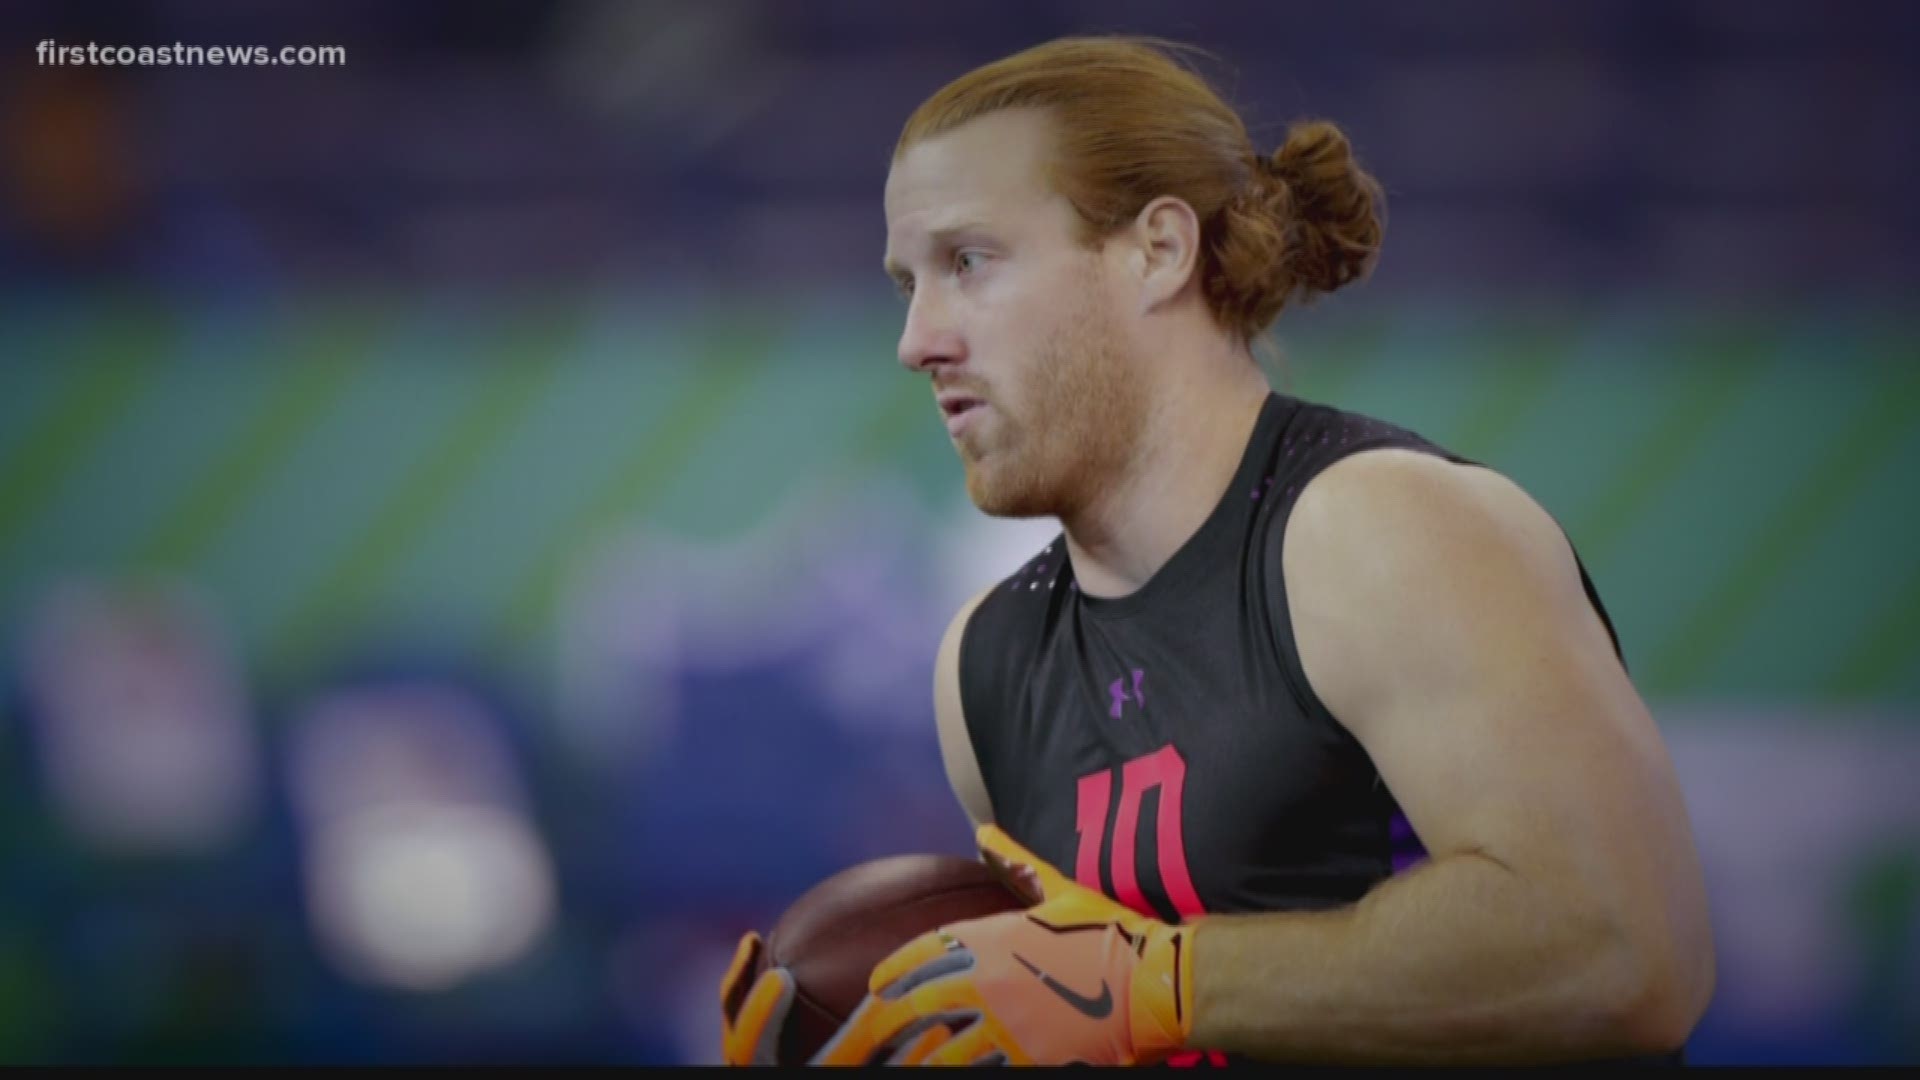 "I woke up in the hospital ...  Apparently, I had been drinking and went into my apartment and cut my wrist." -- Hayden Hurst